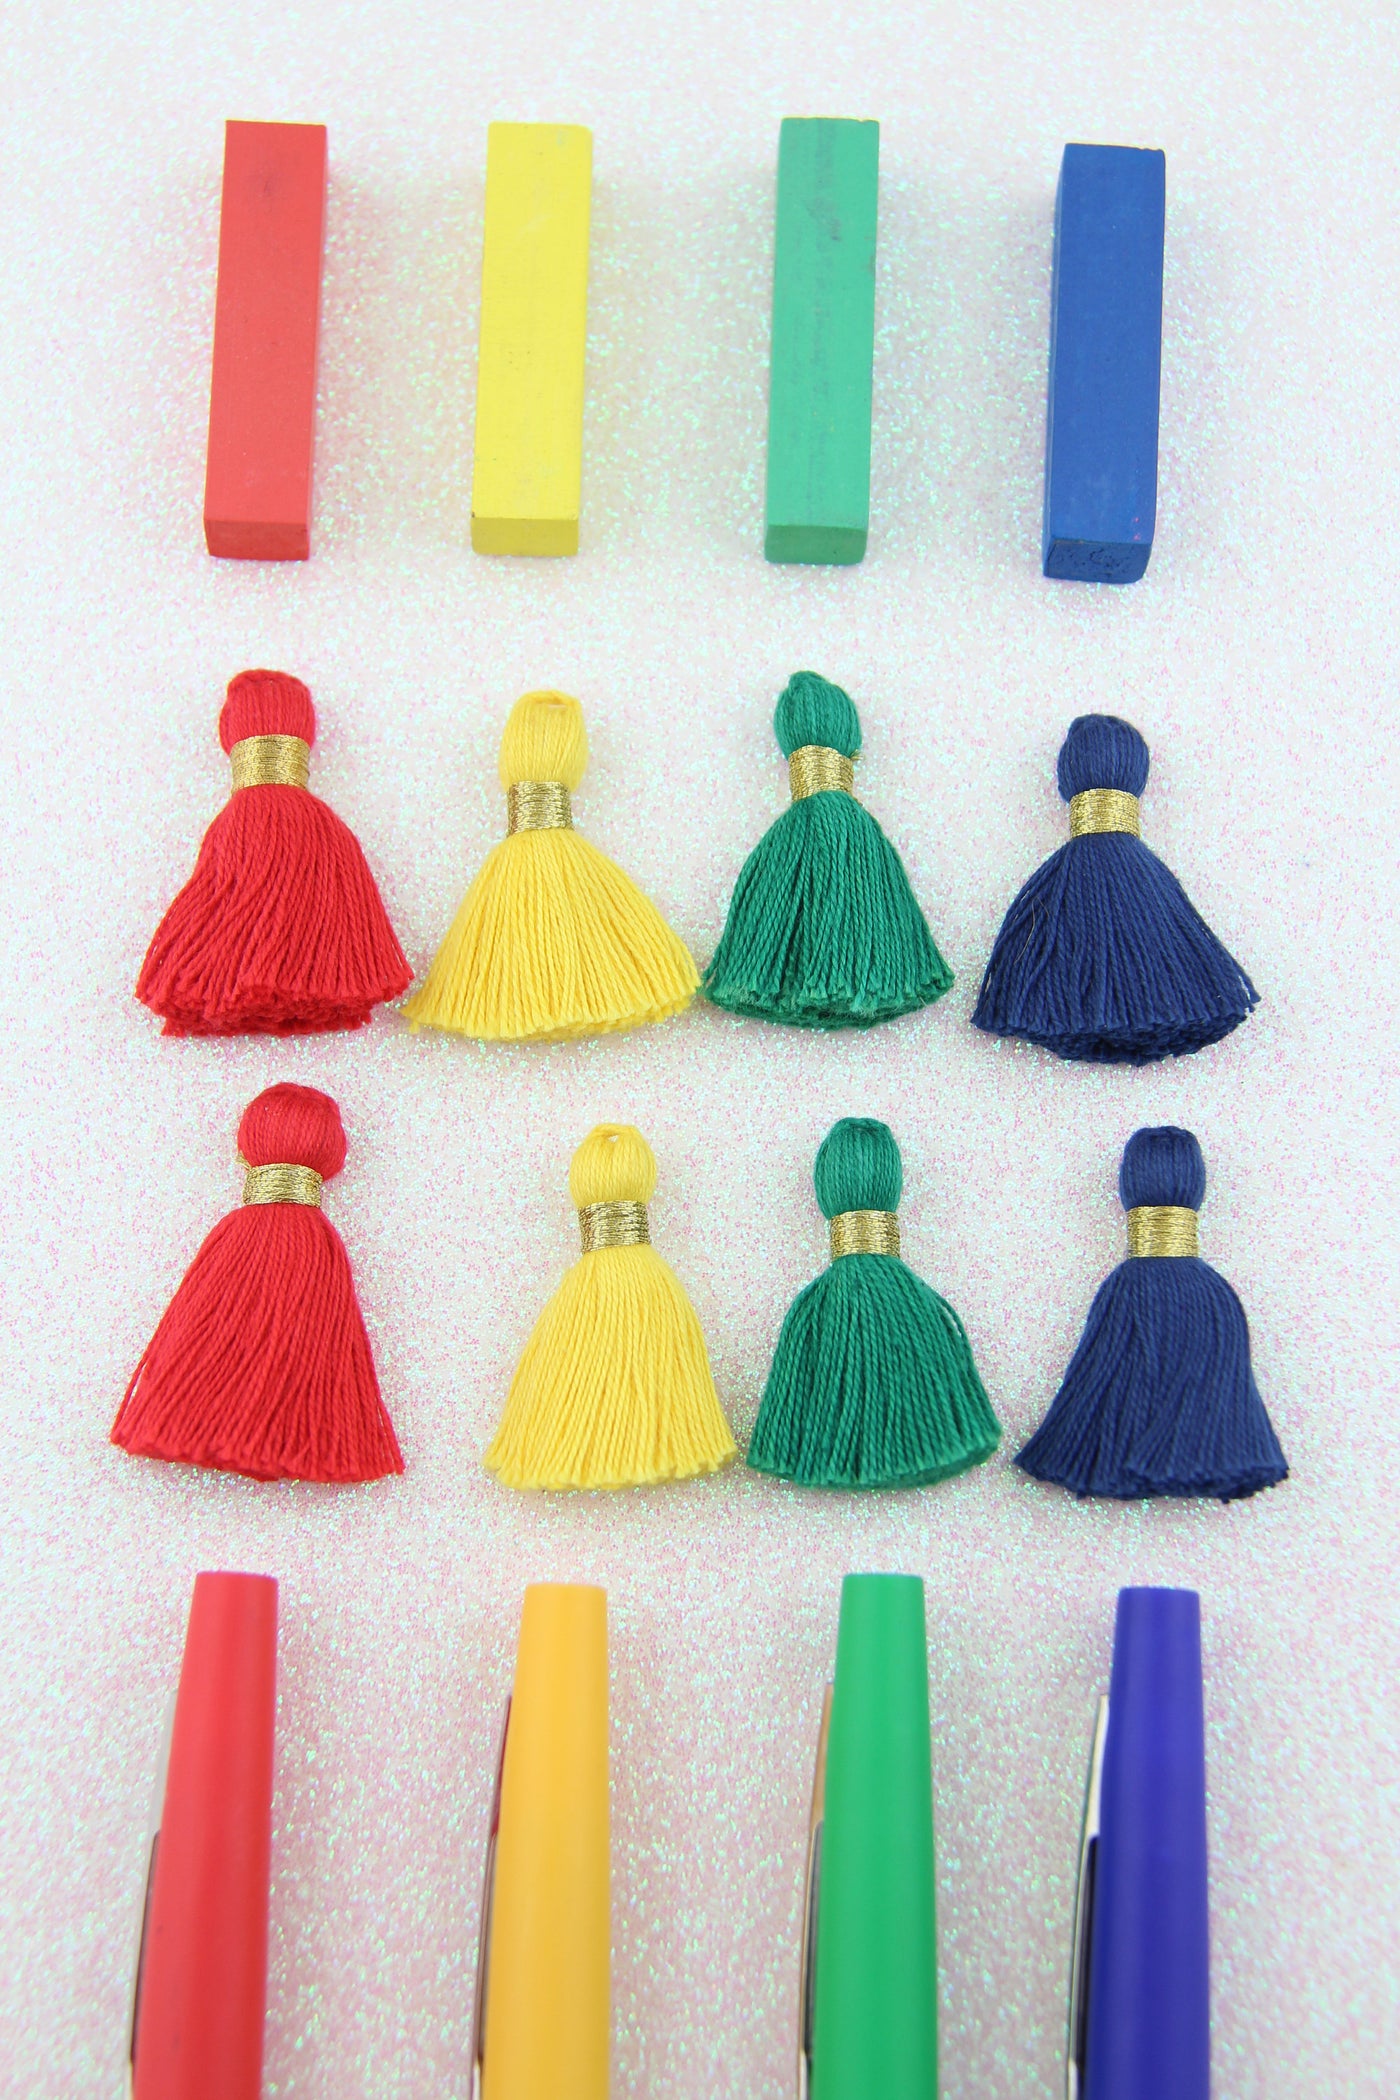 Primary Colors Mix Mini Tassels with Gold Binding, Jewelry Making, 1.25", 8 pcs